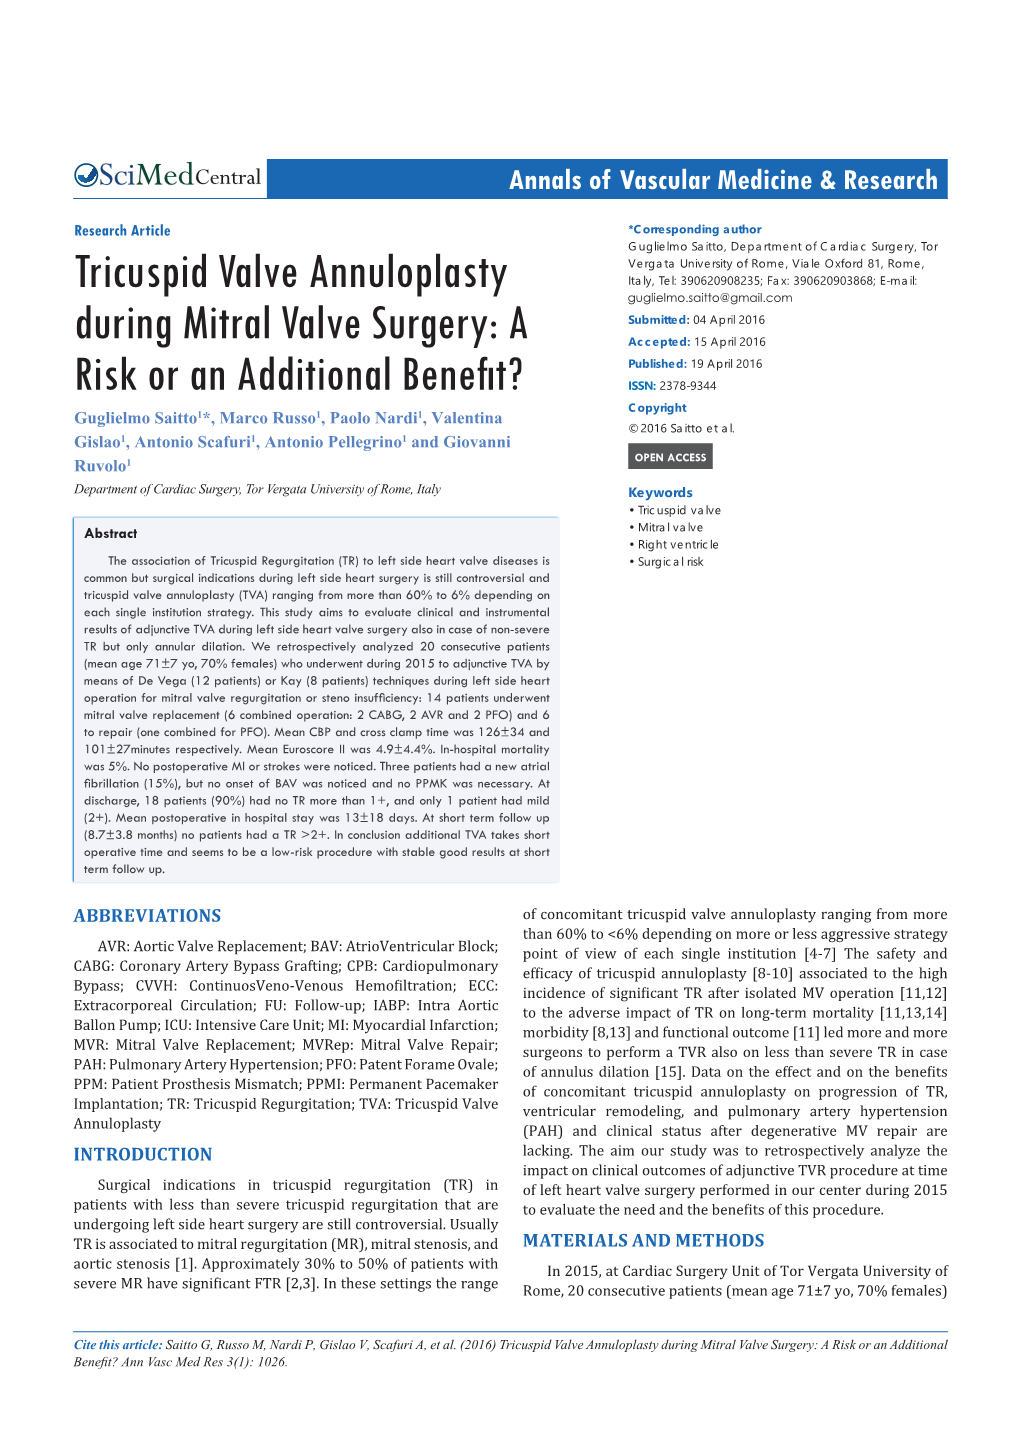 Tricuspid Valve Annuloplasty During Mitral Valve Surgery: a Risk Or an Additional Benefit? Ann Vasc Med Res 3(1): 1026